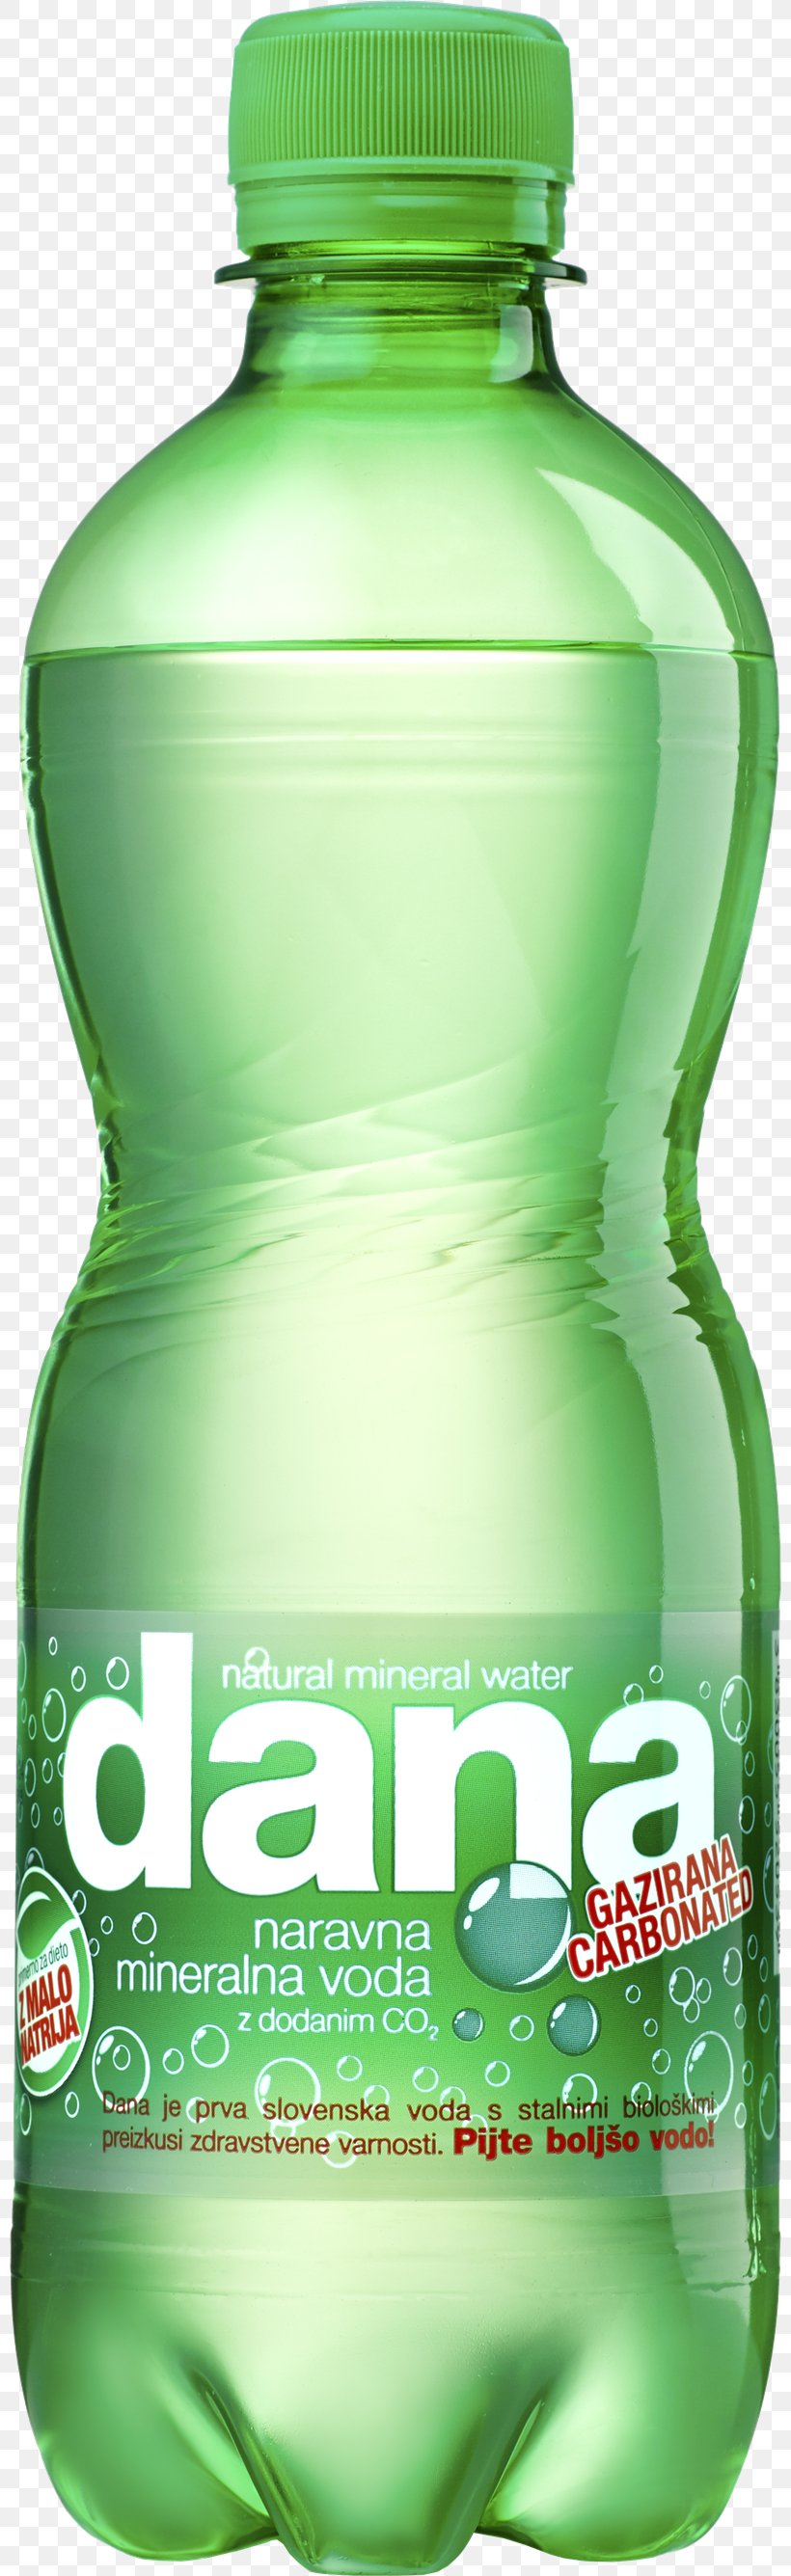 Mineral Water Plastic Bottle Fizzy Drinks, PNG, 800x2671px, Water, Bottle, Carbon Dioxide, Dana, Fizzy Drinks Download Free